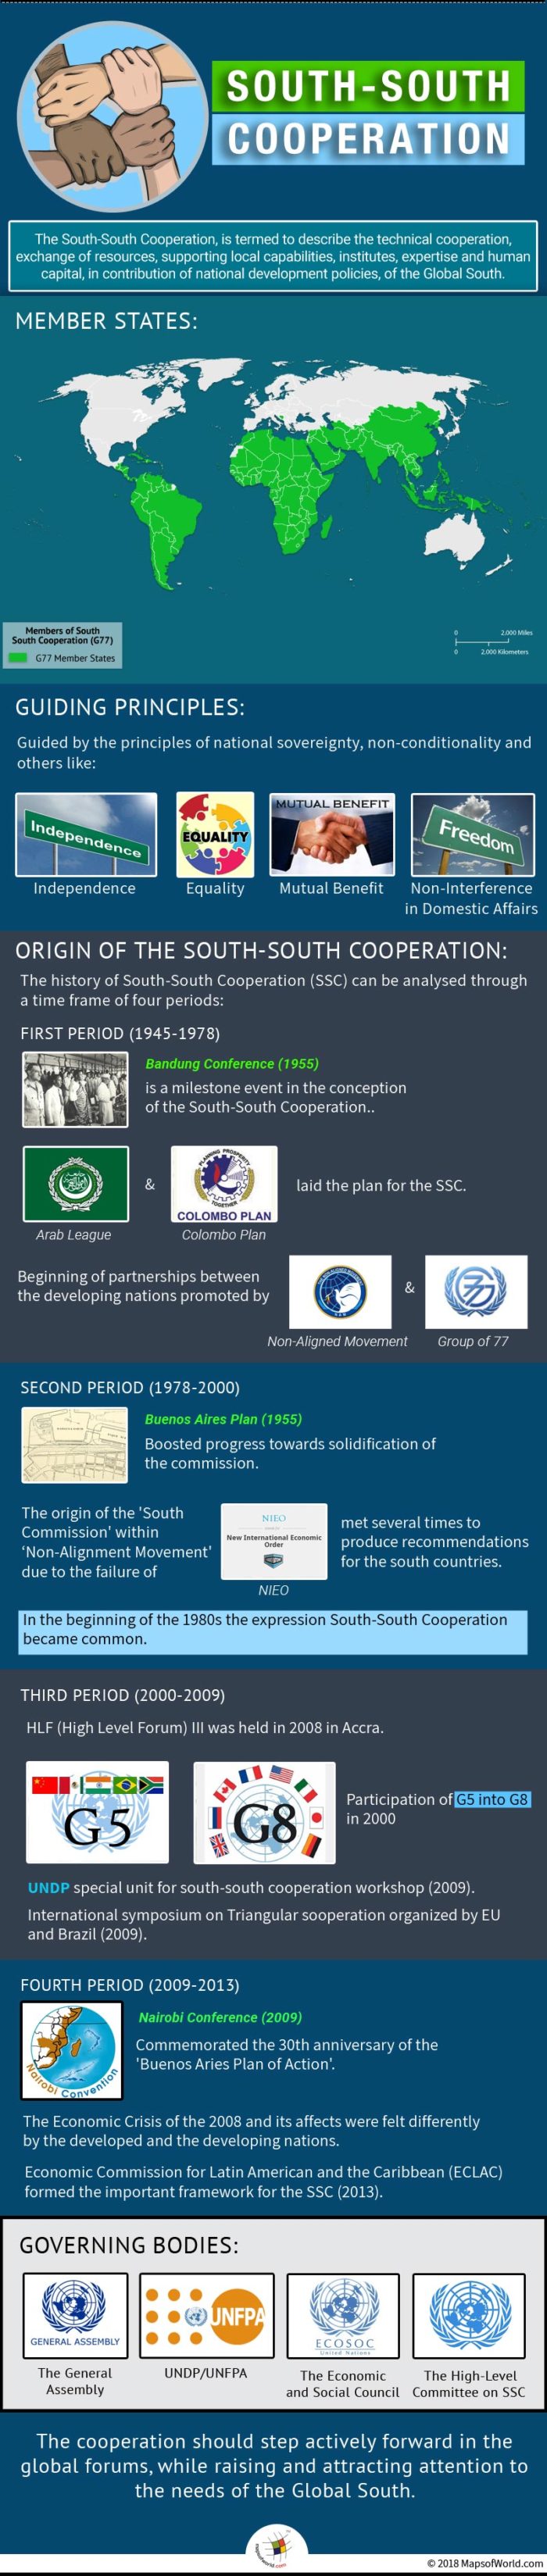 Infographic elaborating south-south cooperation